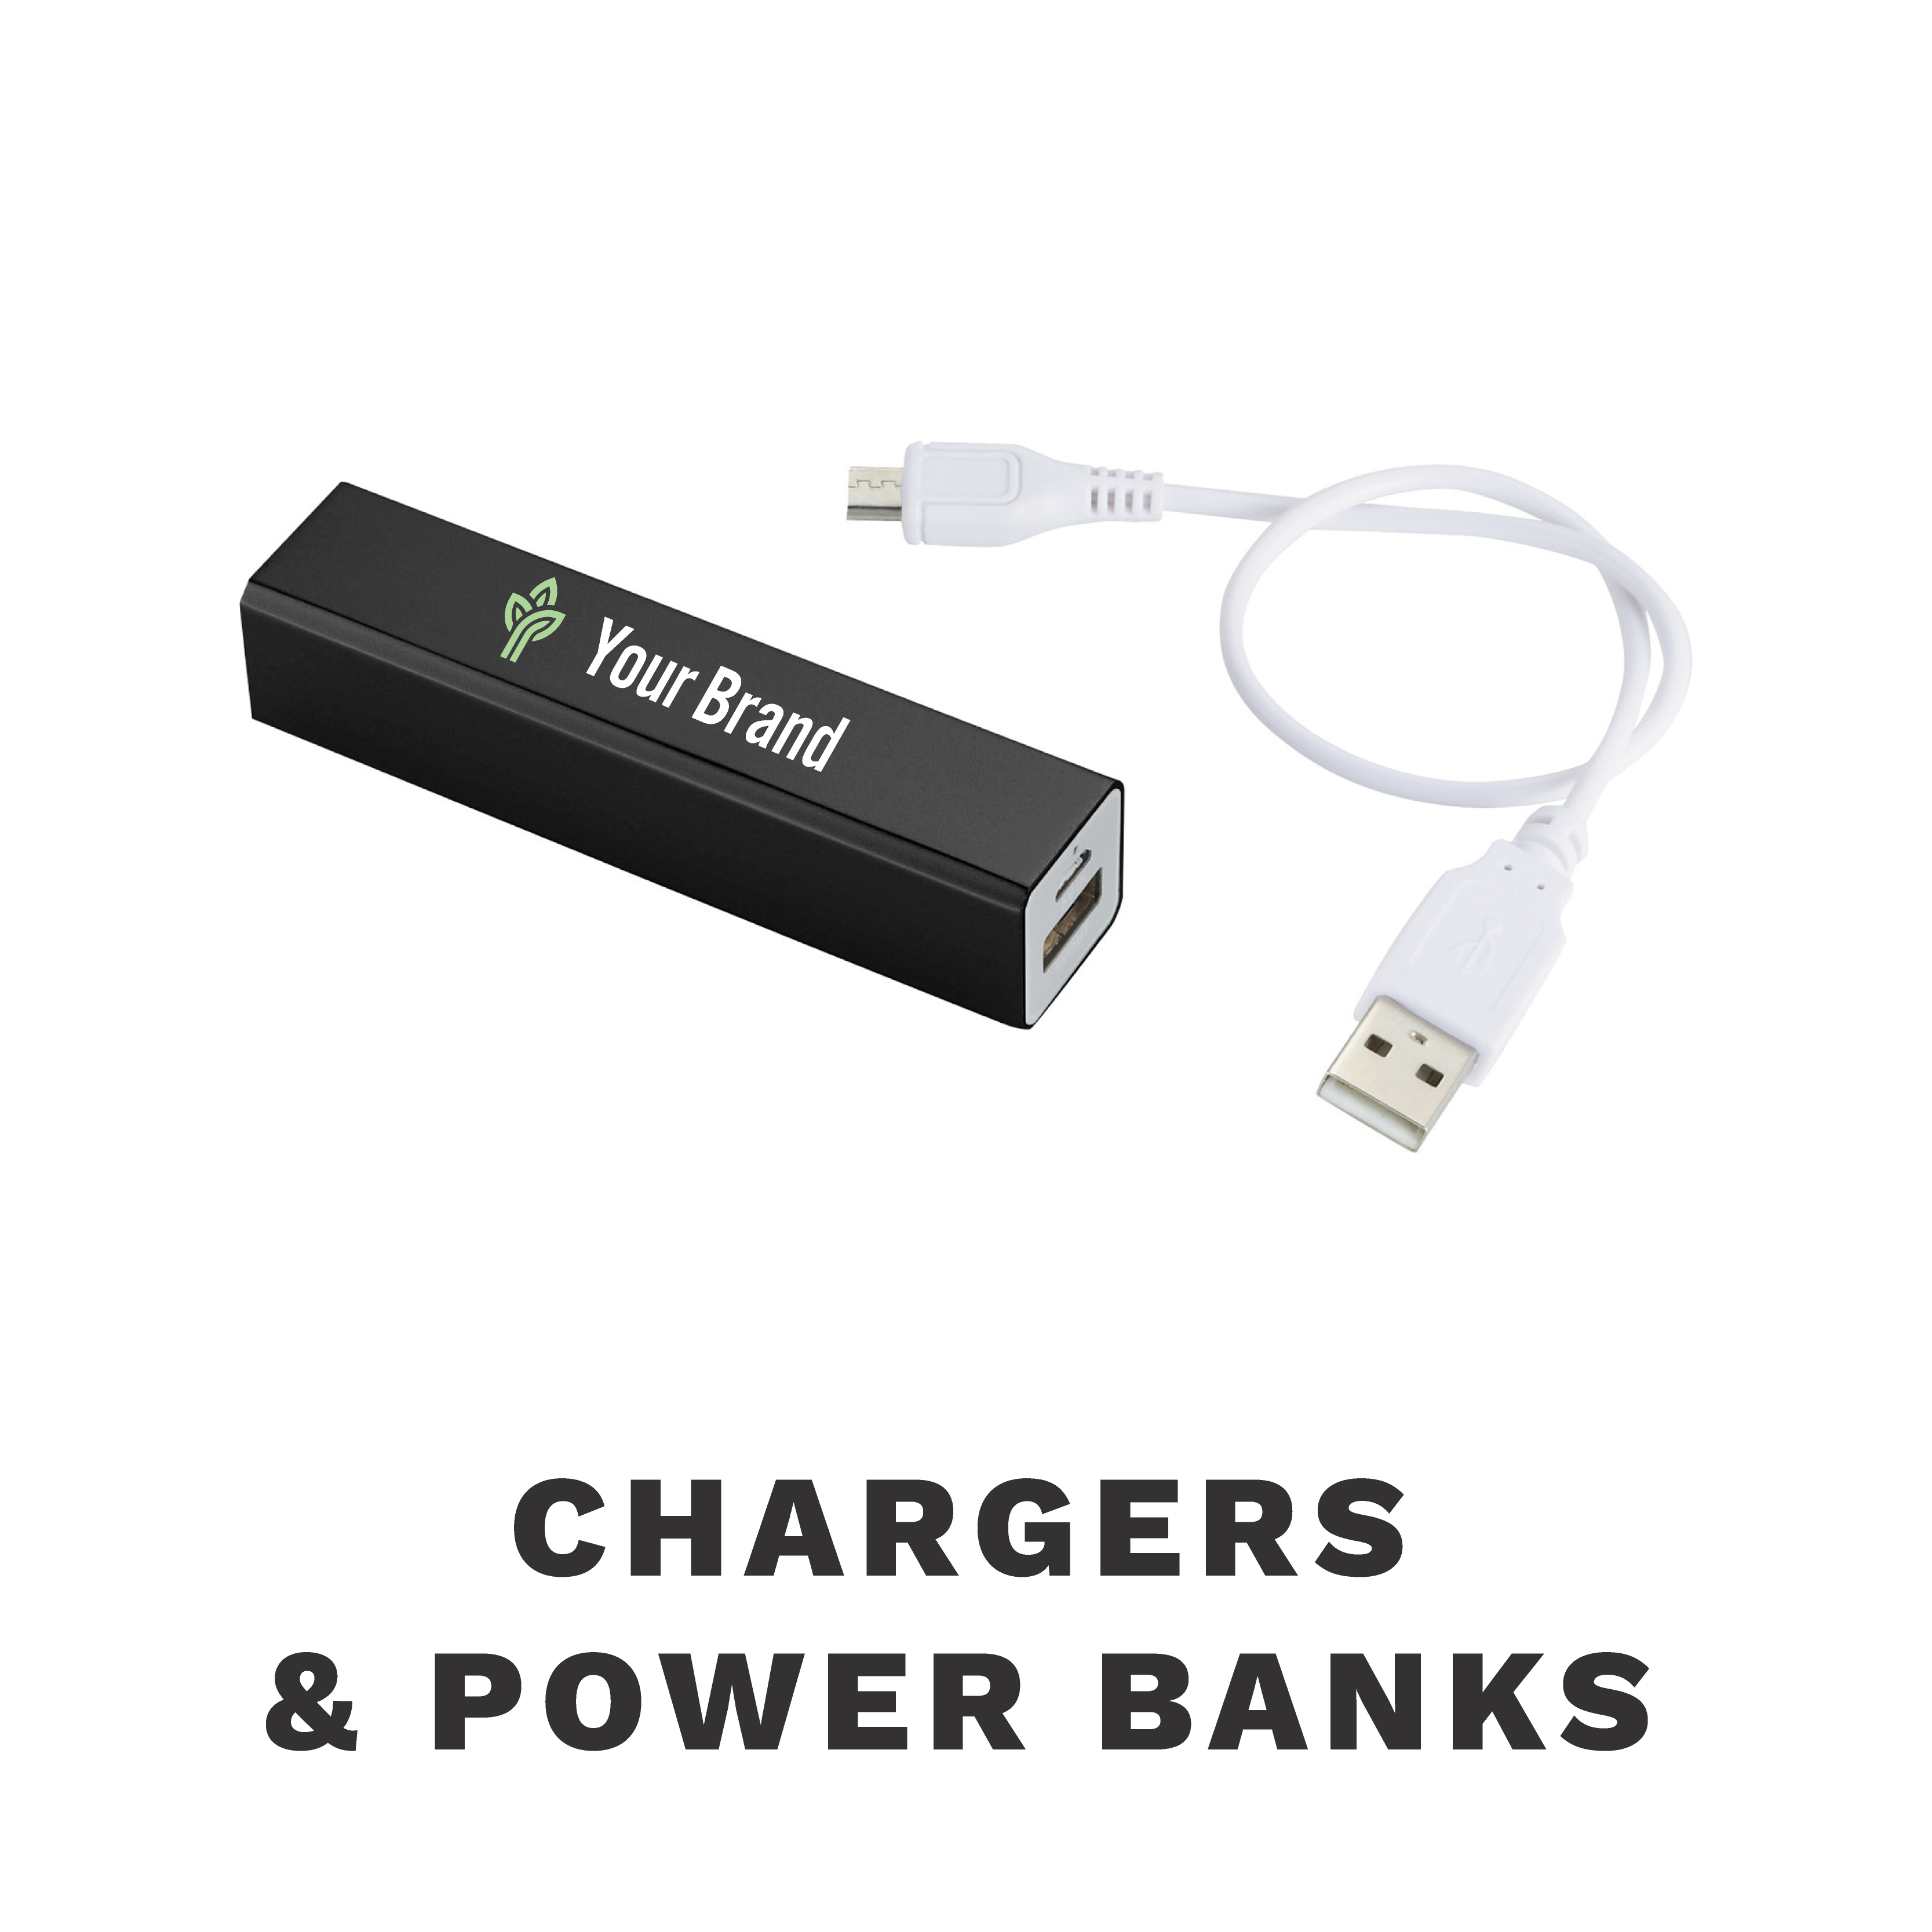 Your brand portable charger